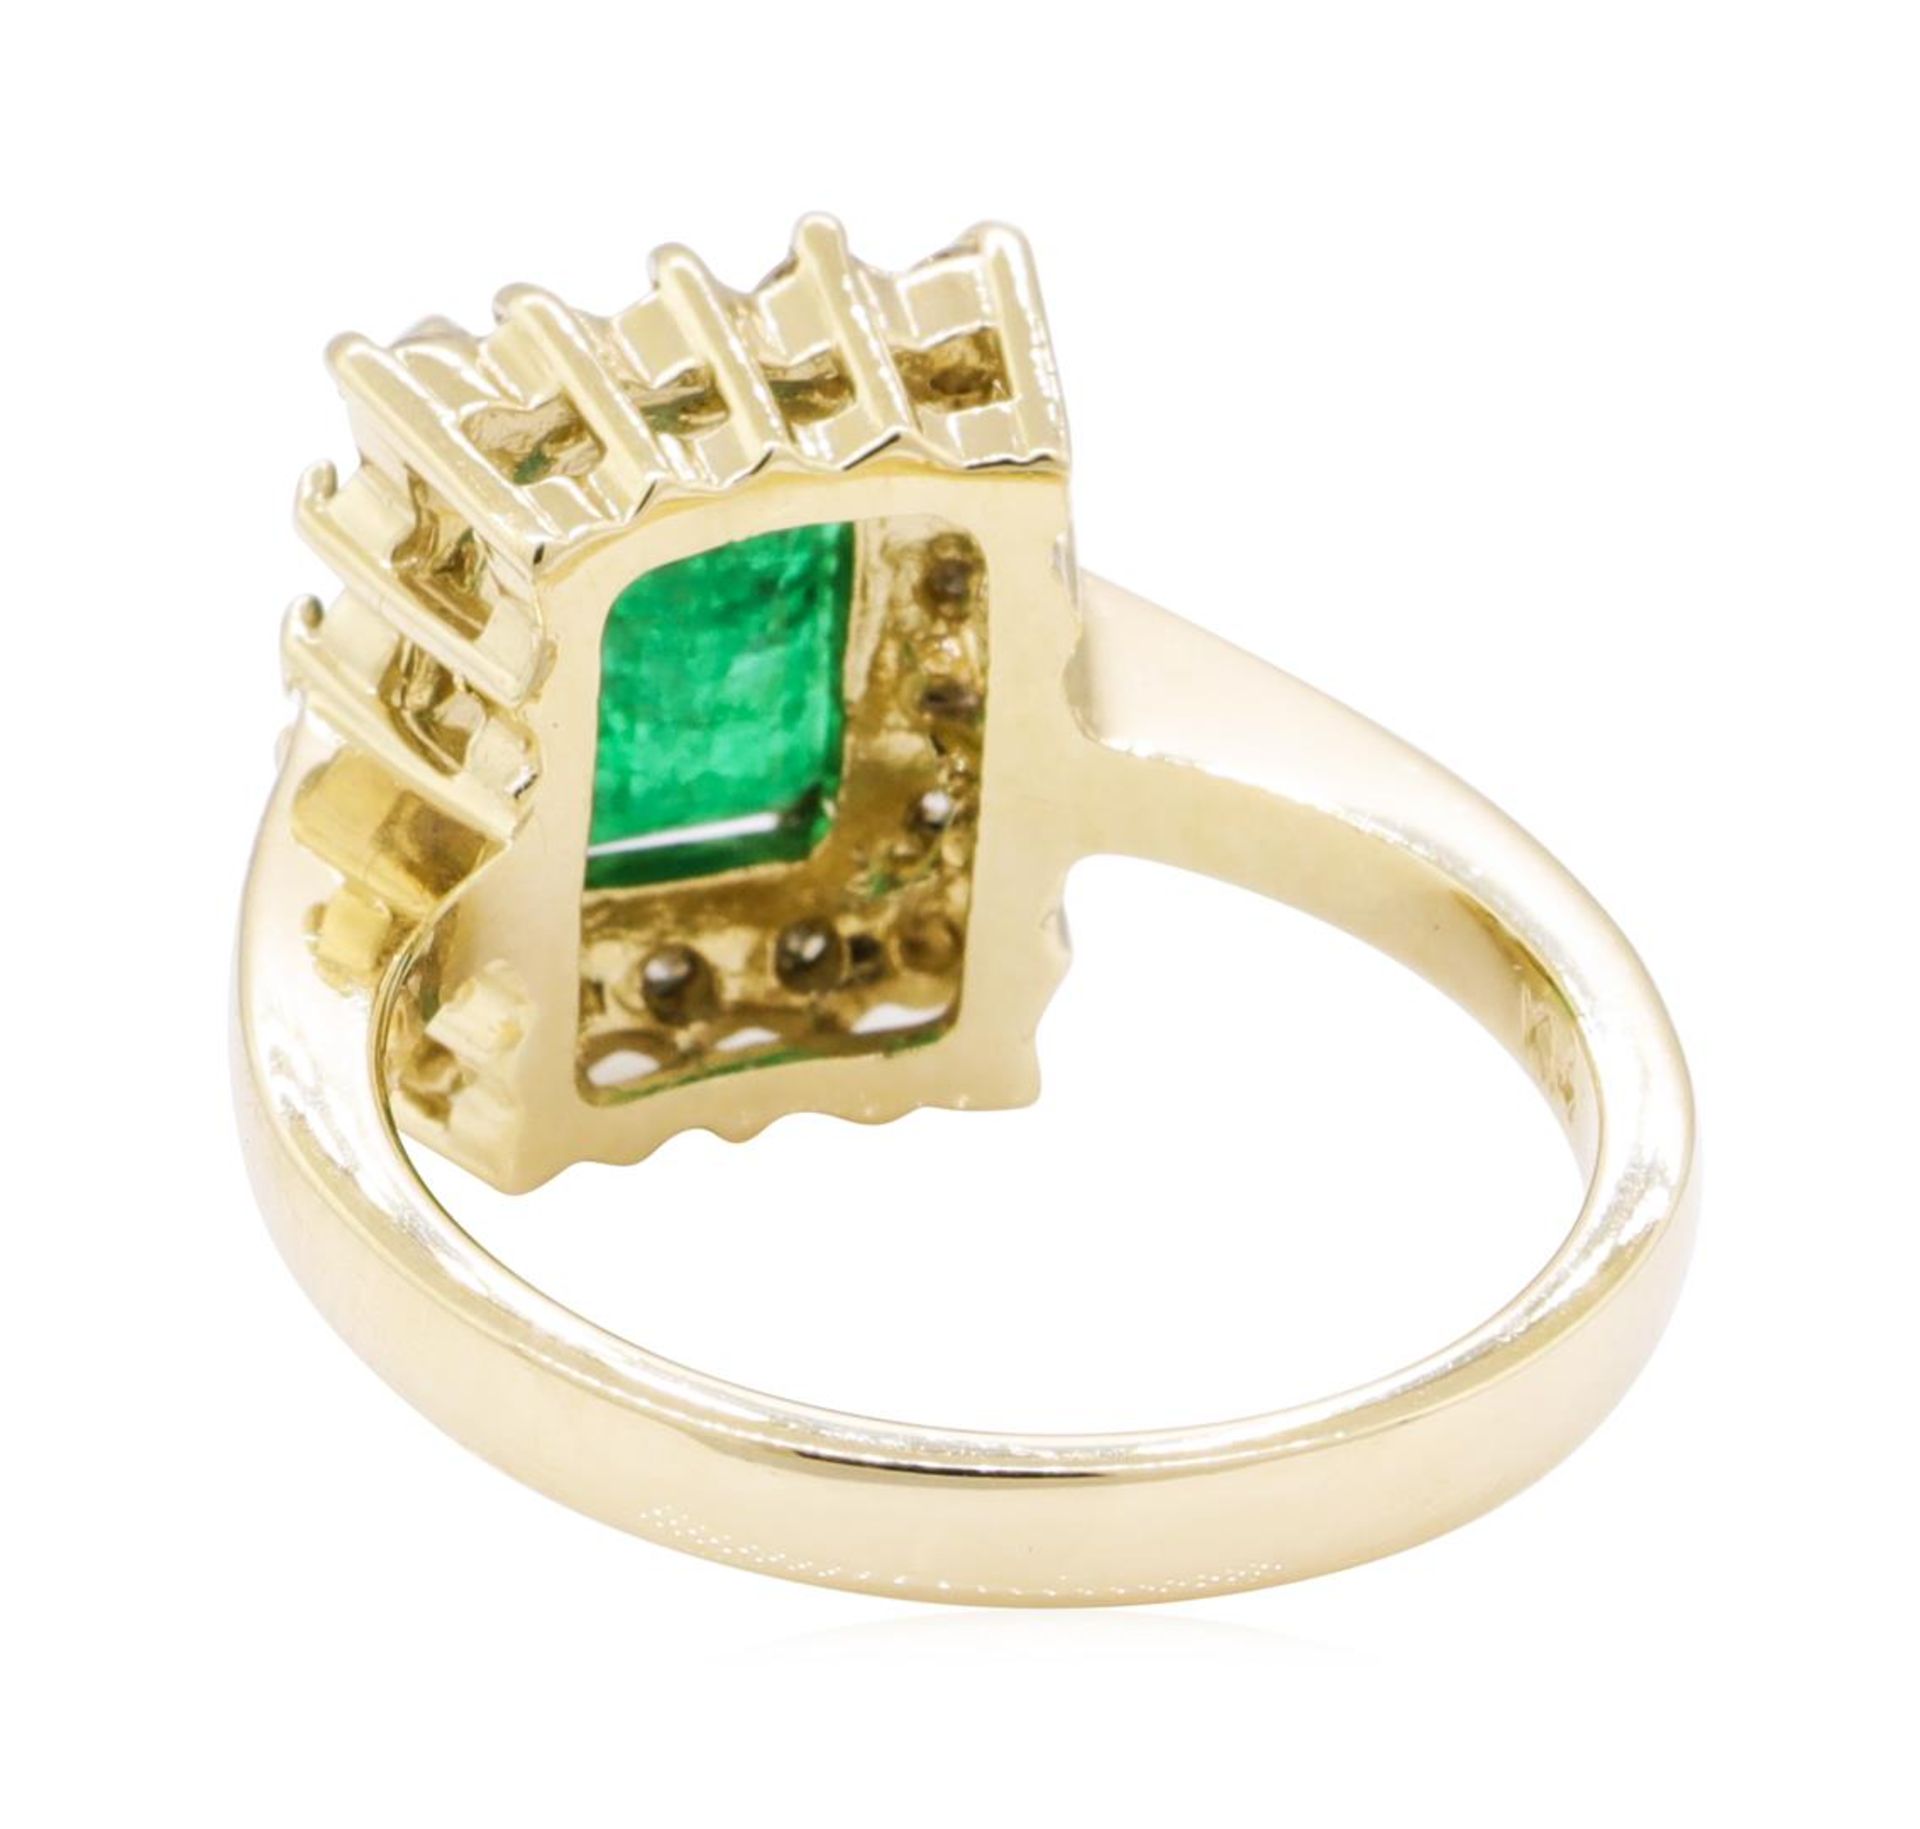 2.90 ctw Emerald and Diamond Ring - 14KT Yellow Gold - Image 3 of 5